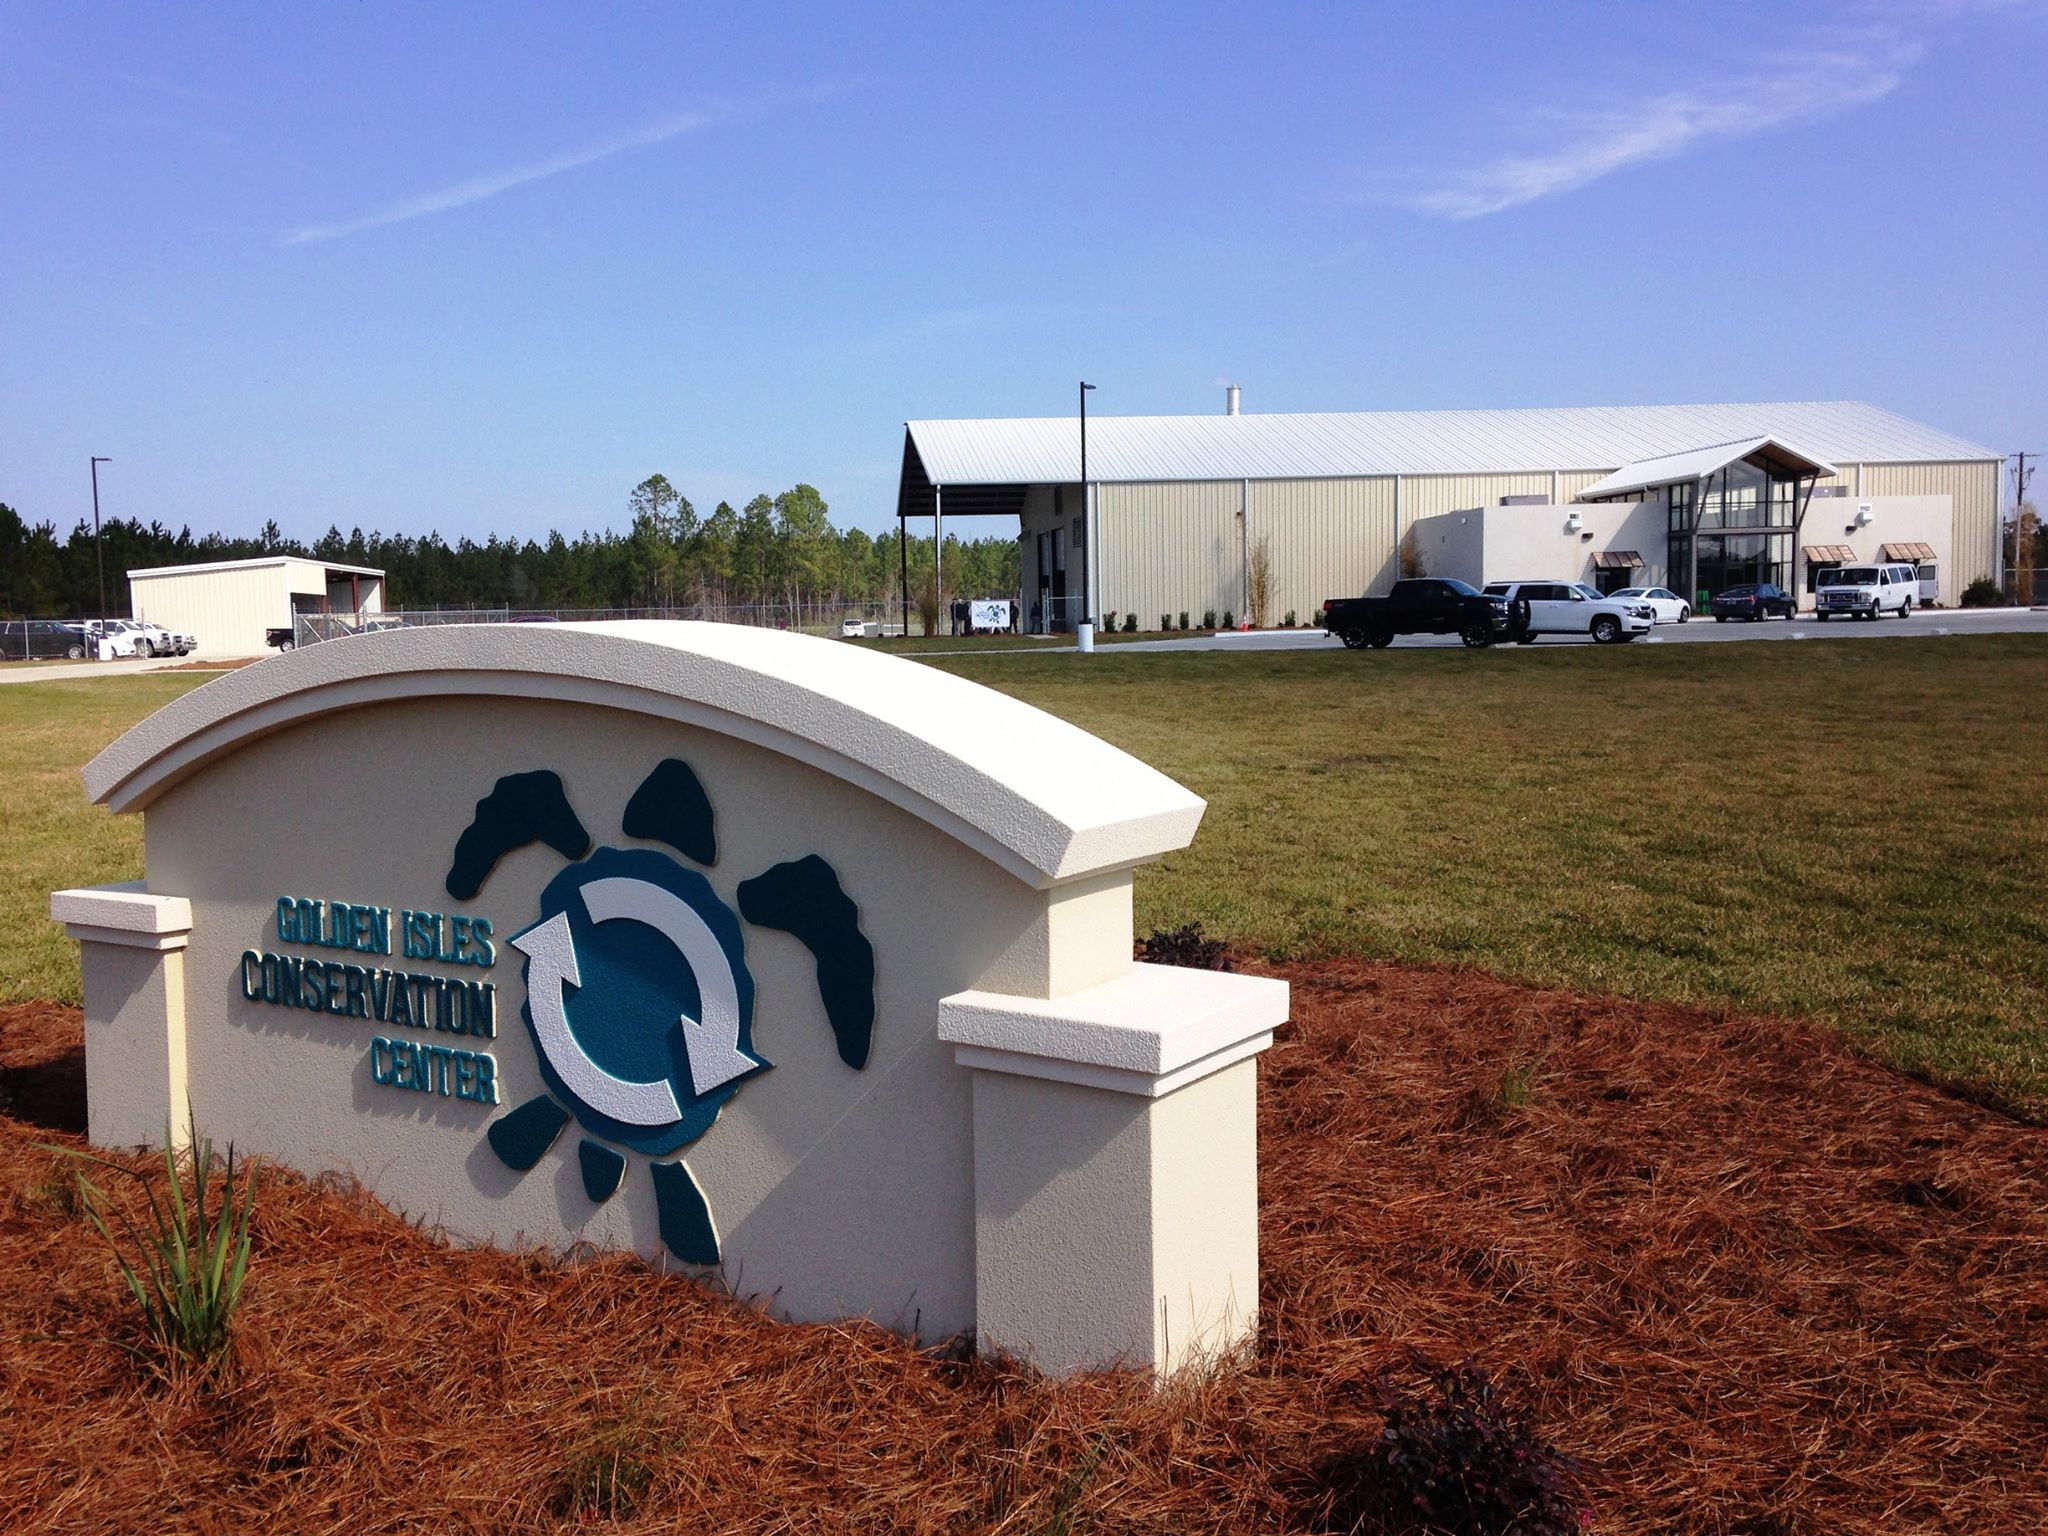 Golden Isles Cox Enterprises Accelerates Sustainability Goals by 10 Years